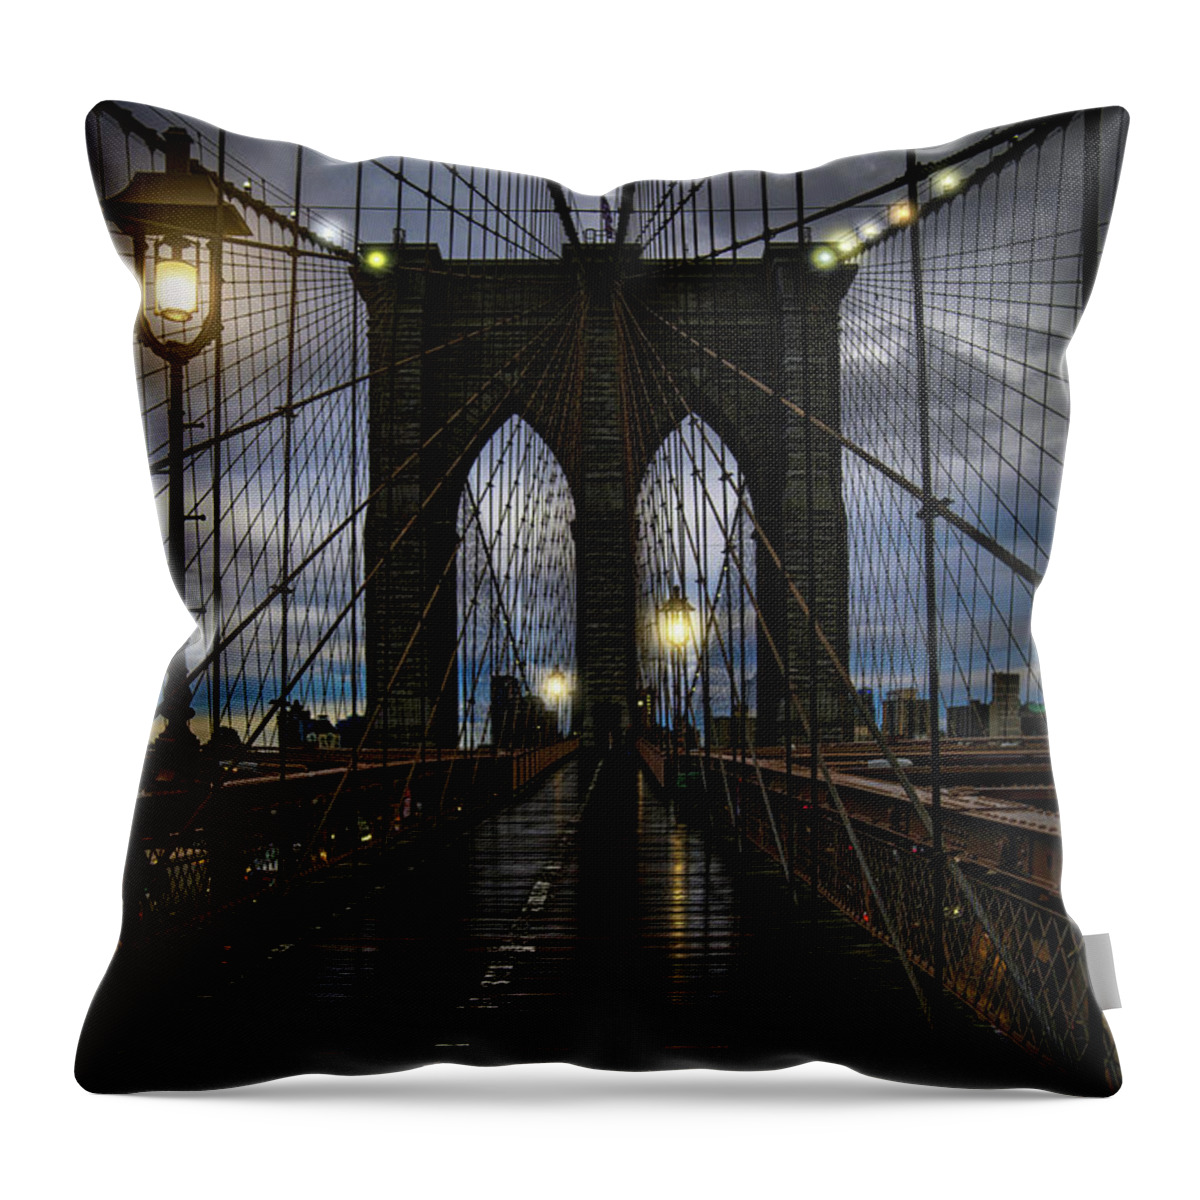 Streetlights Throw Pillow featuring the photograph Wet Day On The Brooklyn Bridge by Chris Lord